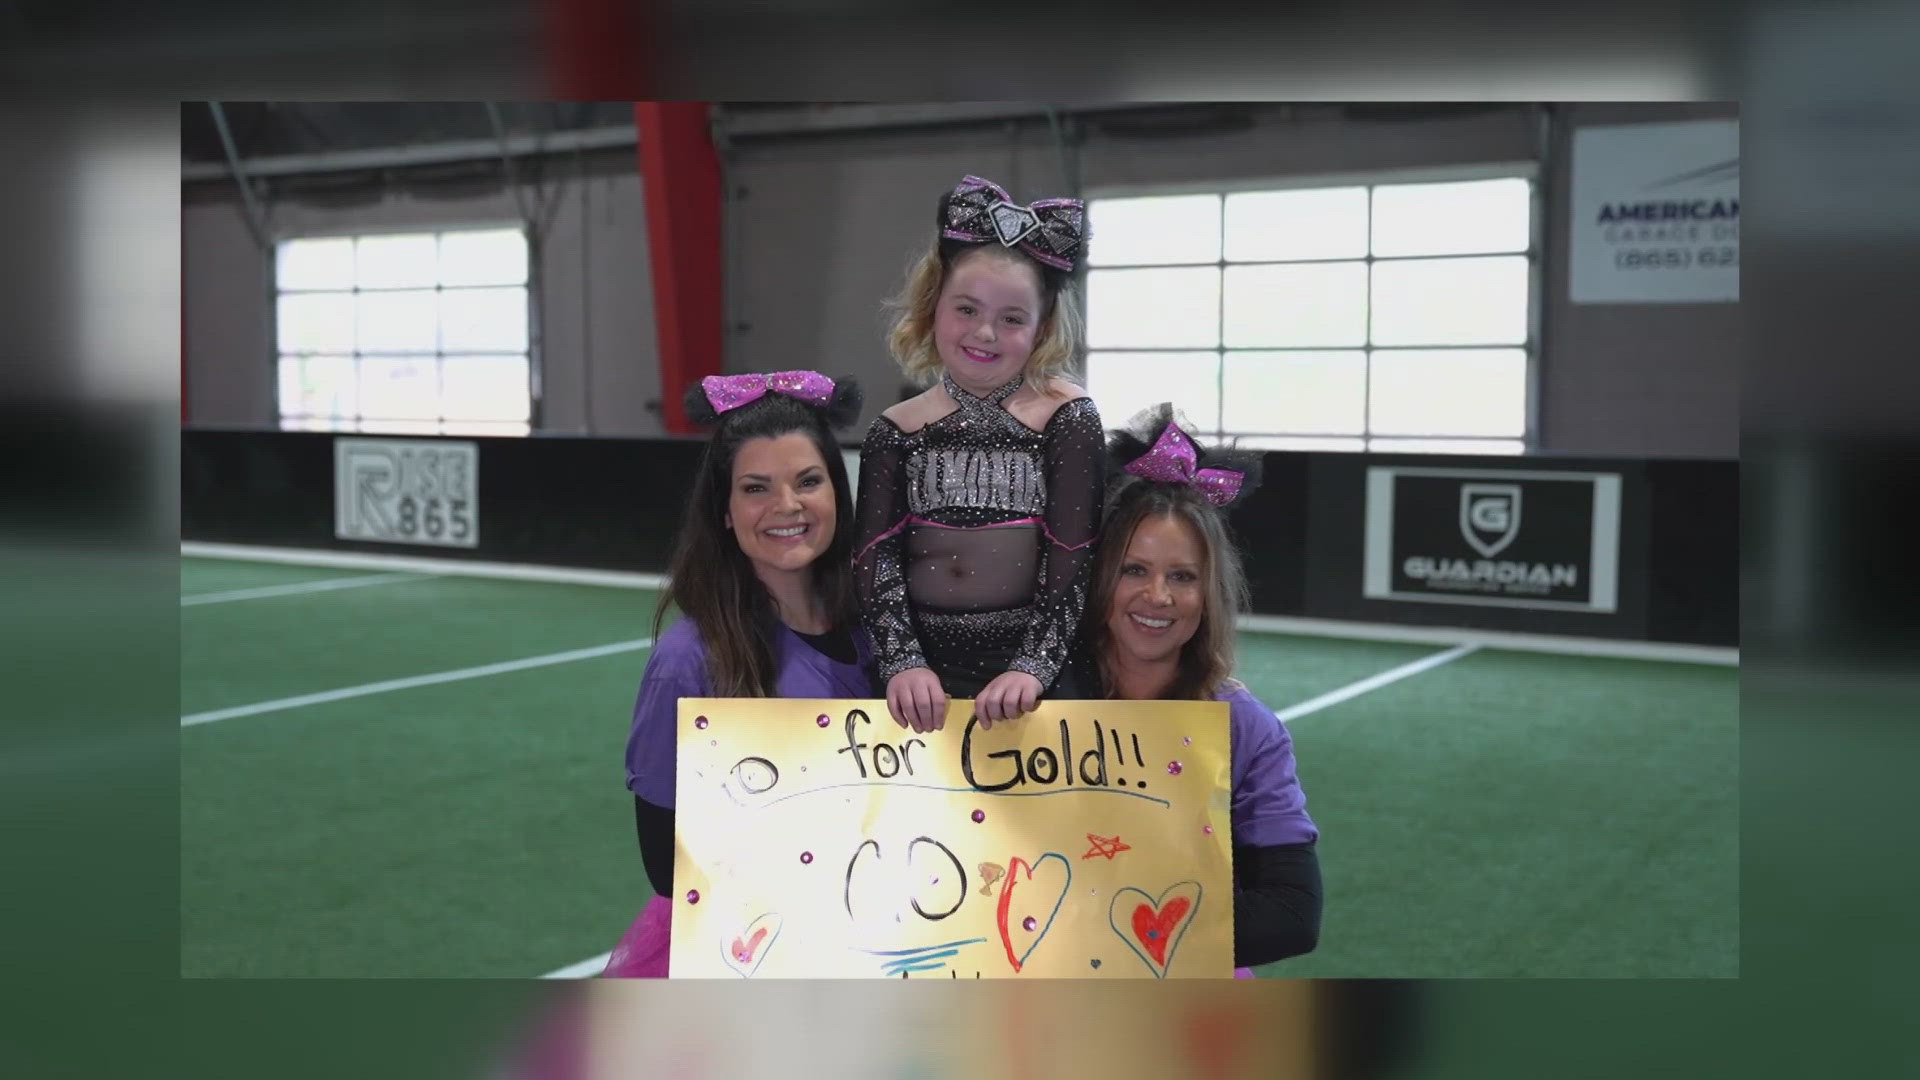 Sicilee is a competitive cheerleader who doesn't let her diagnosis hold her back.